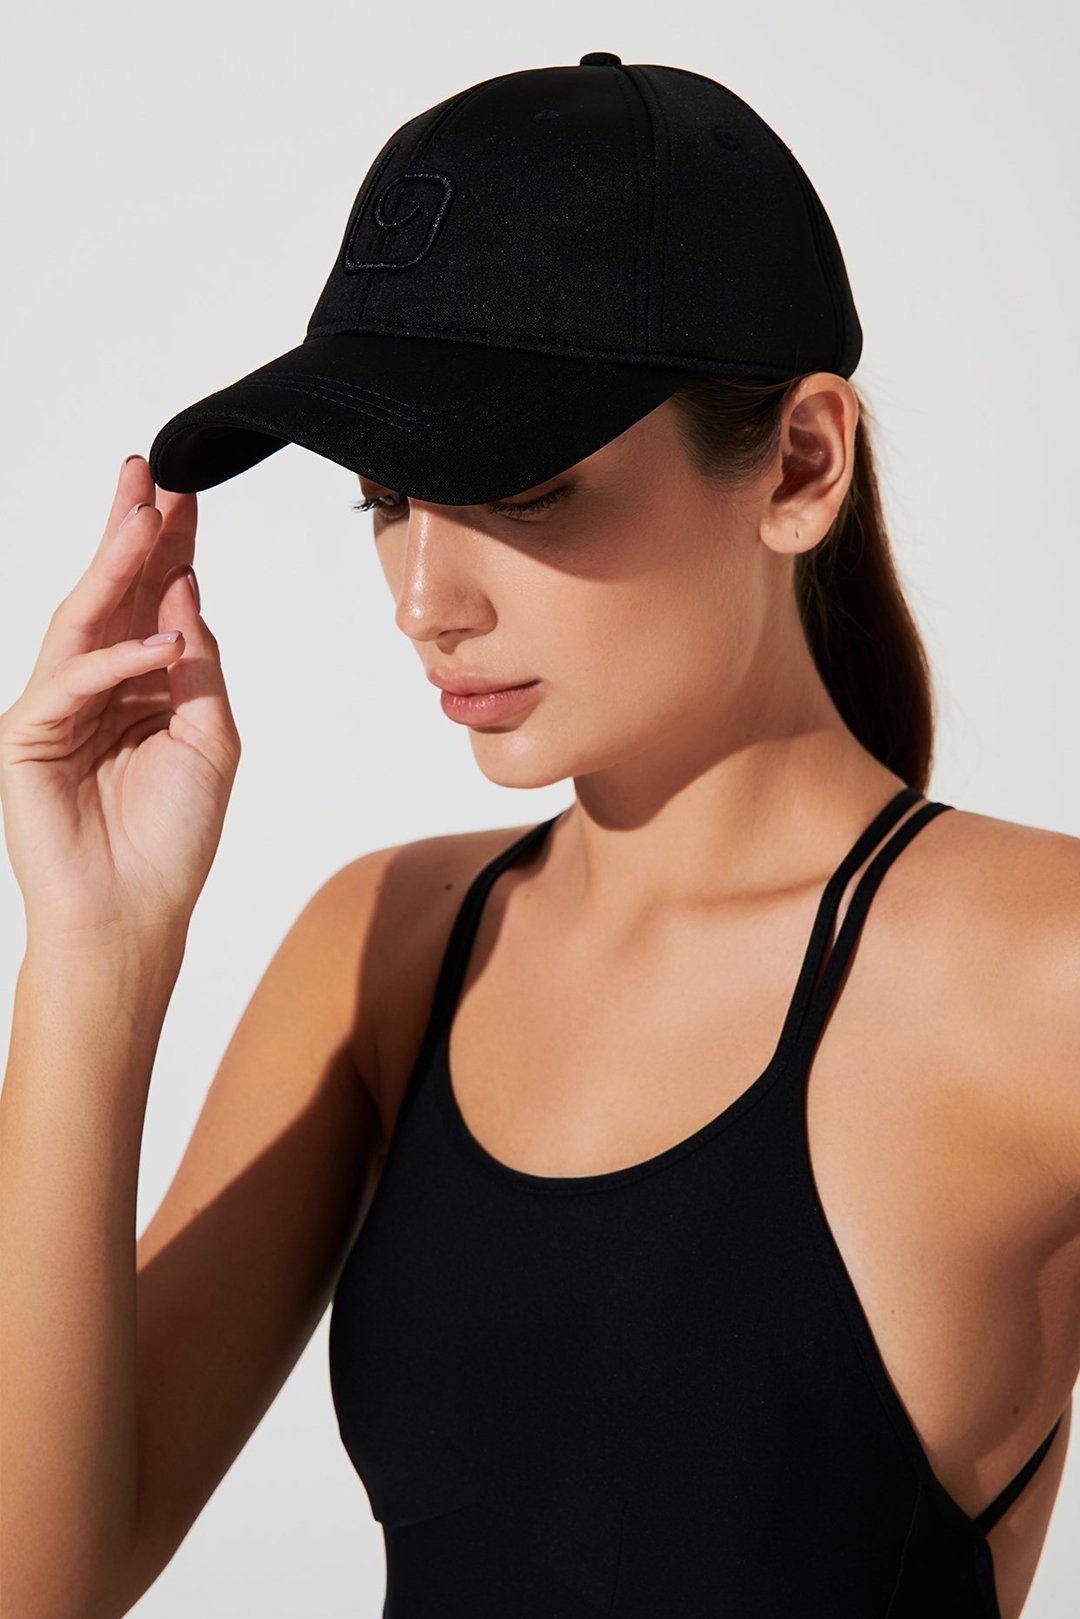 A black baseball cap with the black brand name olaben depicted in the image.